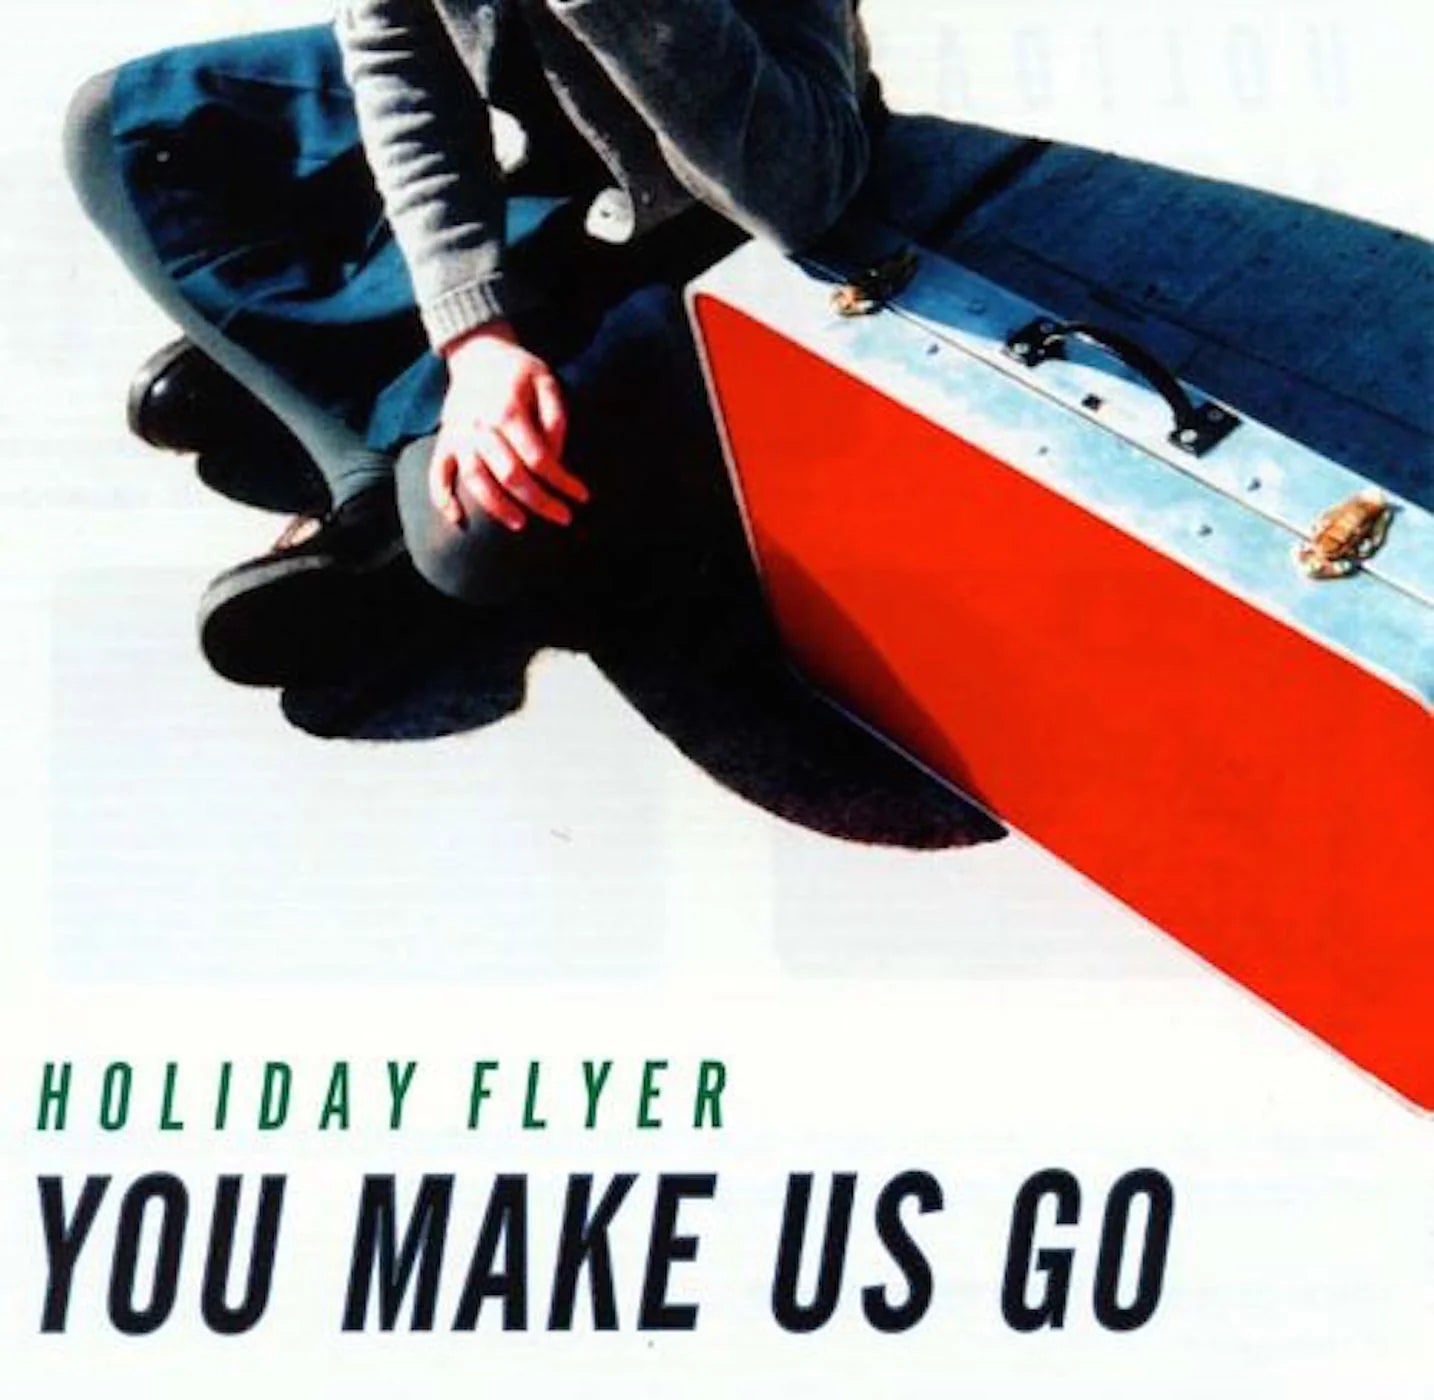 Holiday Flyer - Try Not to Worry + The Rainbow Confection + I Hope + You Make Us Go 4xLP+DIG bundle